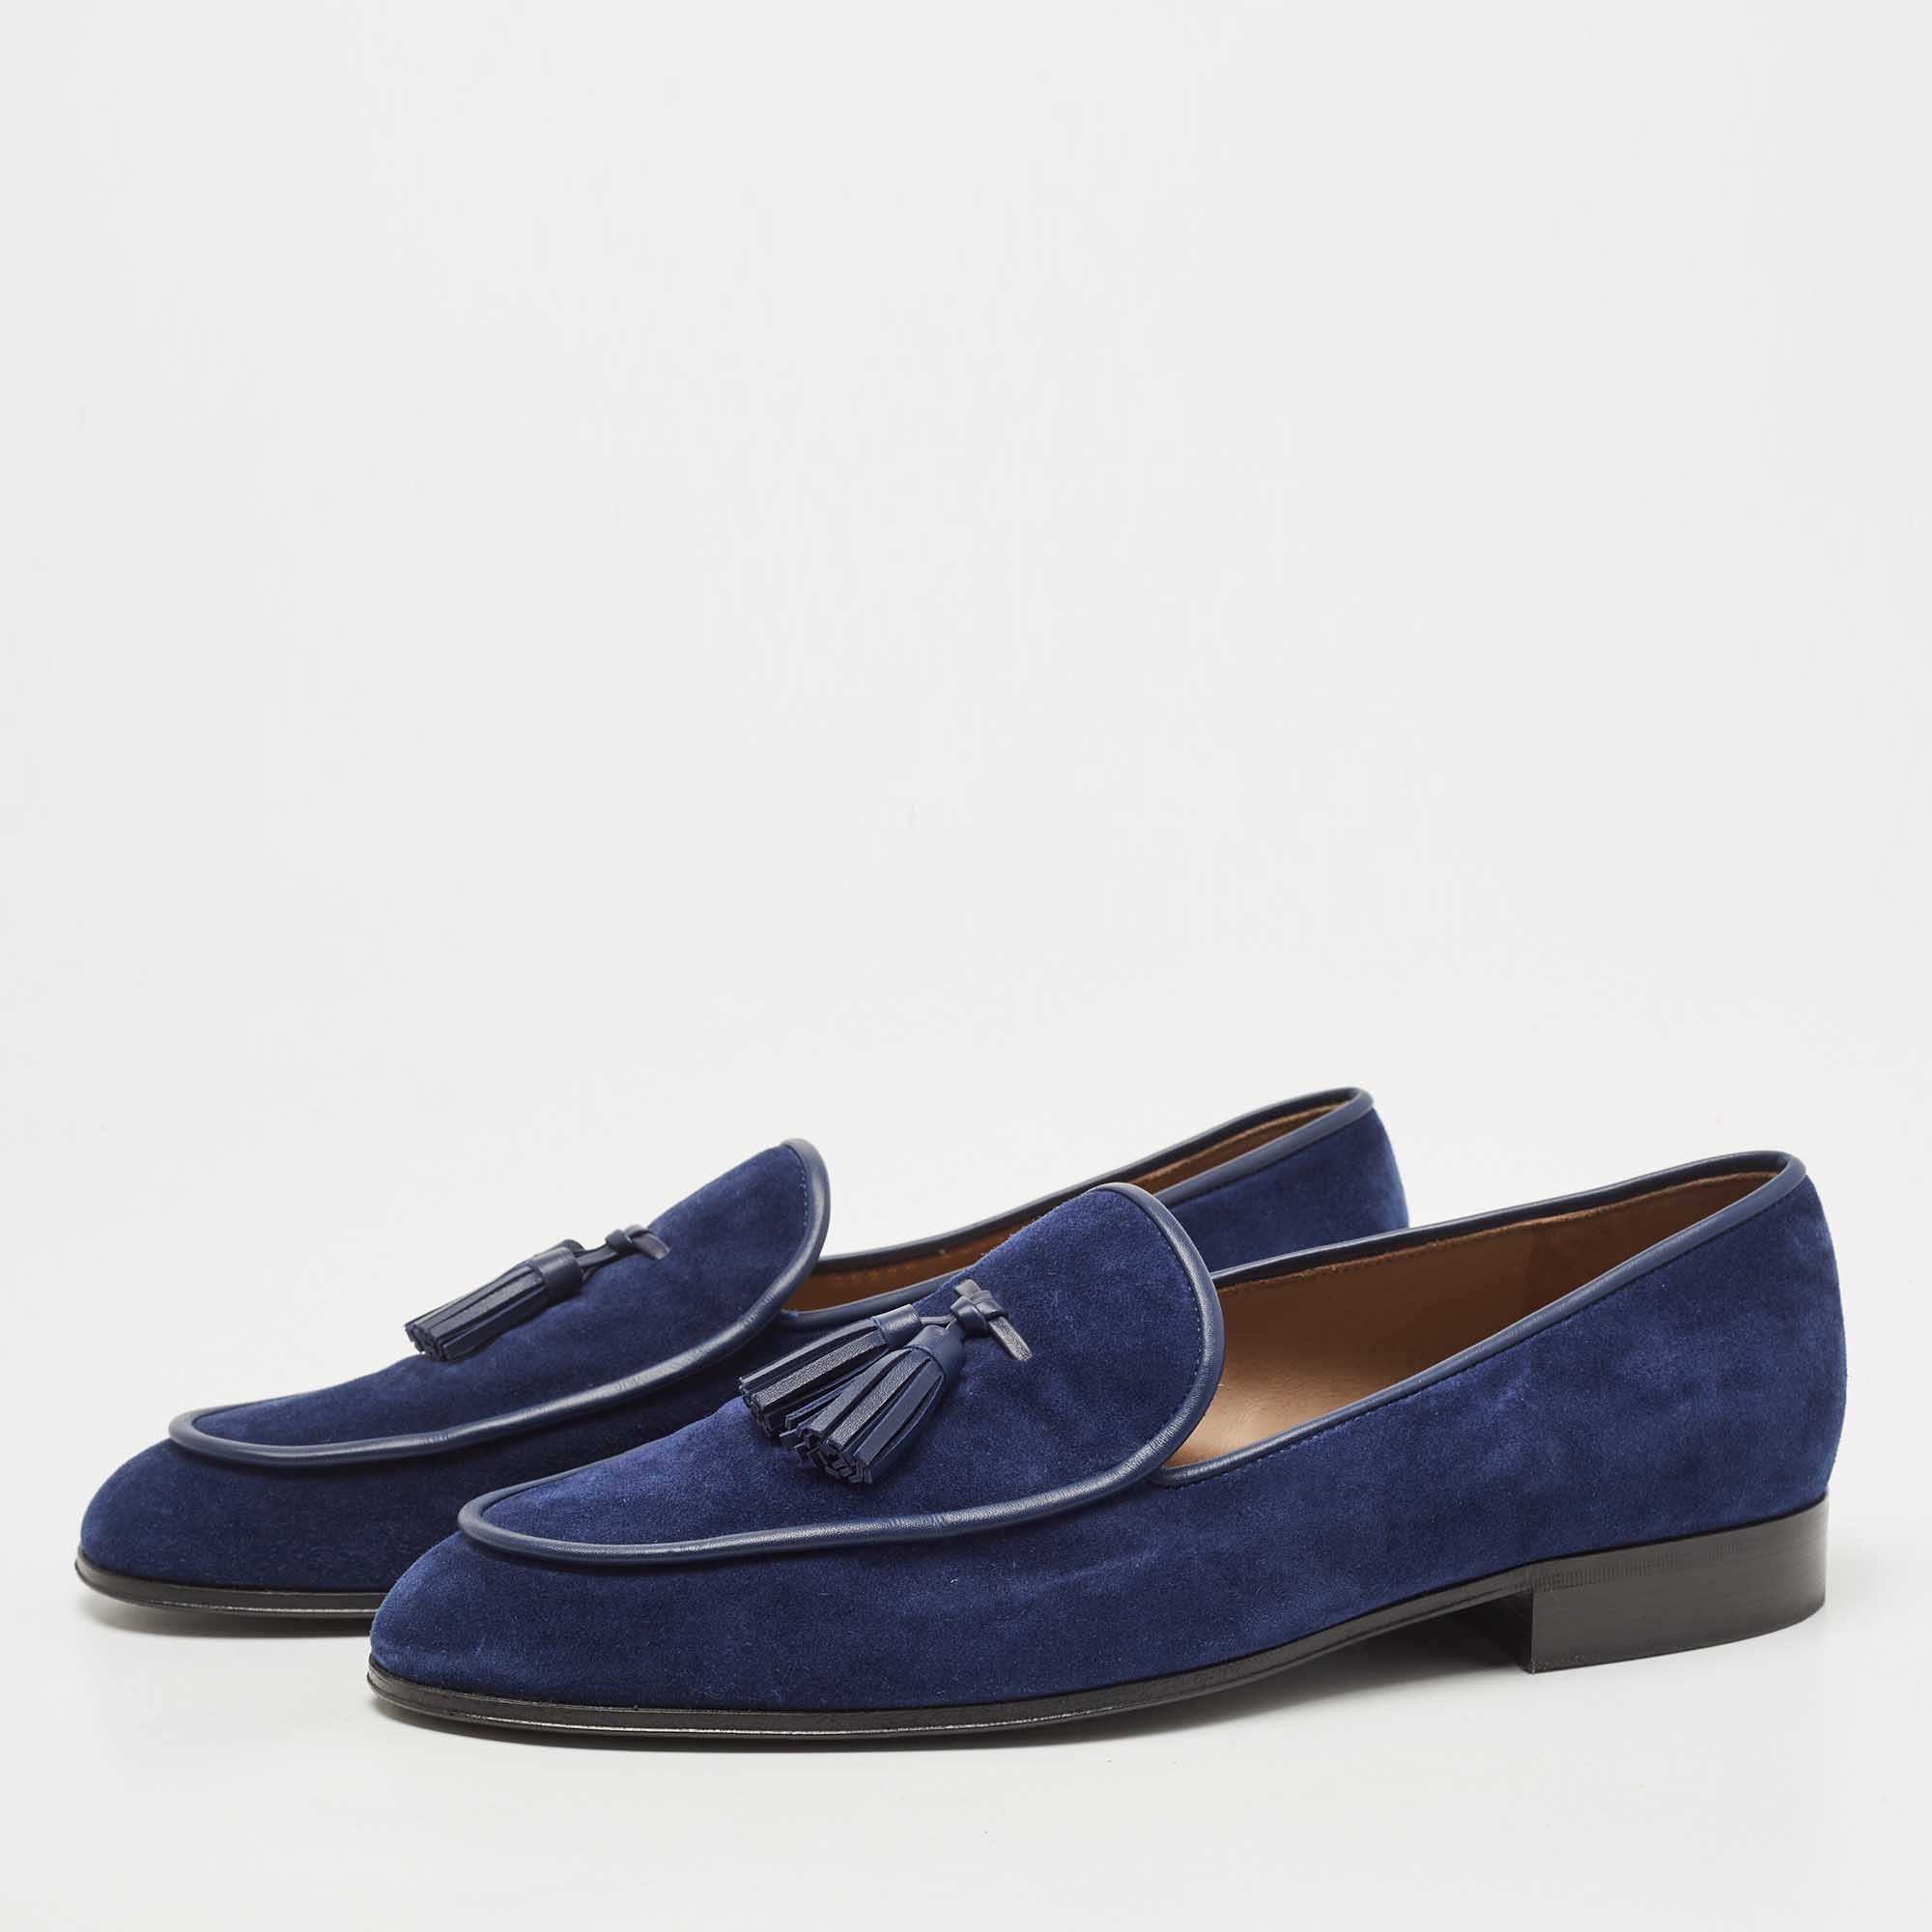 

Gianvito Rossi Blue Suede Tassel Slip On Loafers Size